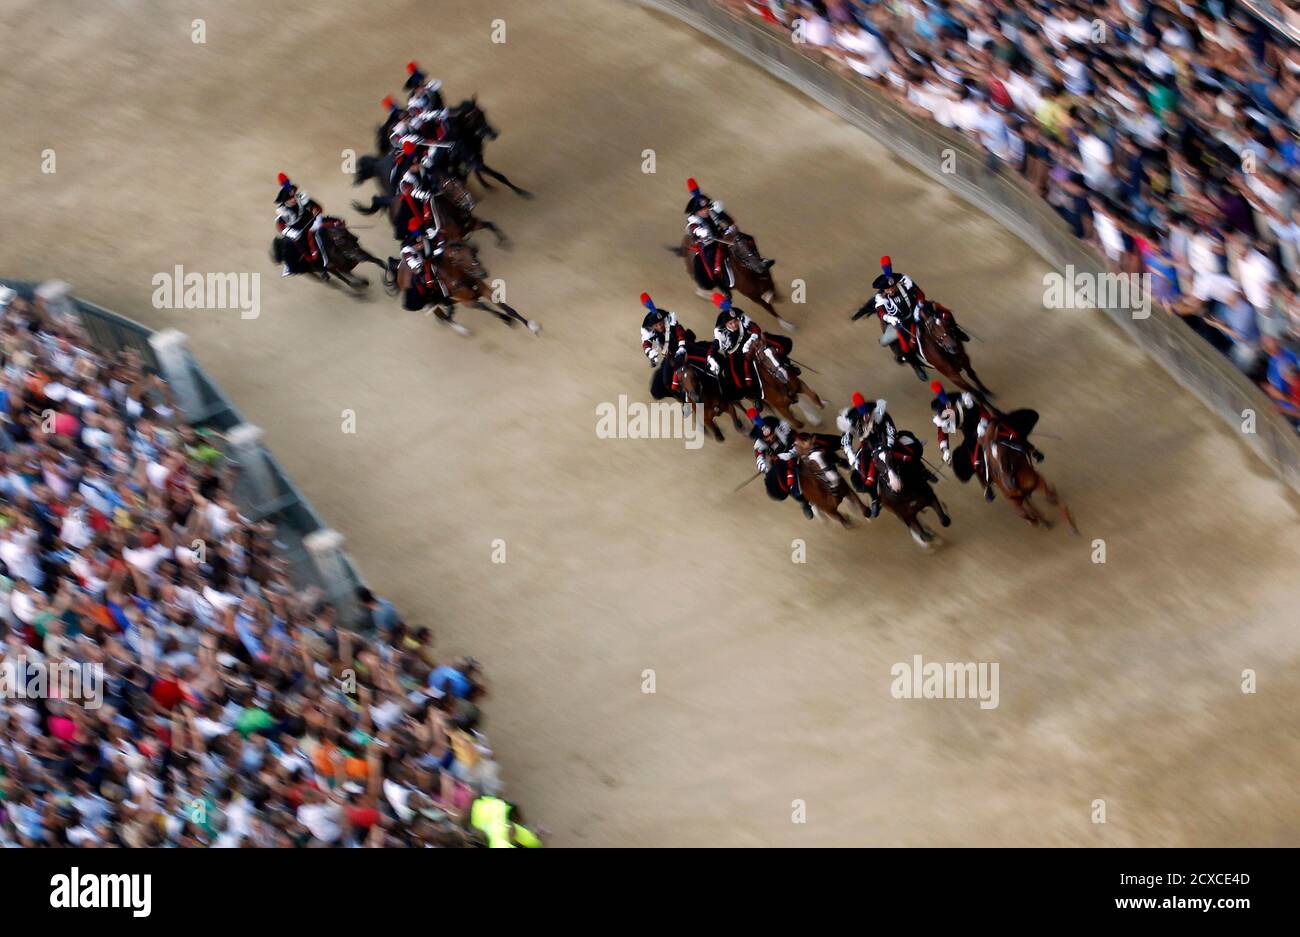 Mounted Italian Carabinieri police charge around the track with swords drawn prior to a training session of the Palio race in Siena's main square August 15, 2012. Every year on August 16, almost without fail since the mid-1600s, 10 riders compete bareback around Siena's shell-shaped central square in a bid to win the Palio, a silk banner depicting the Madonna and child. REUTERS/Alessandro Bianchi (ITALY - Tags: SOCIETY ANIMALS SPORT HORSE RACING) Stock Photo